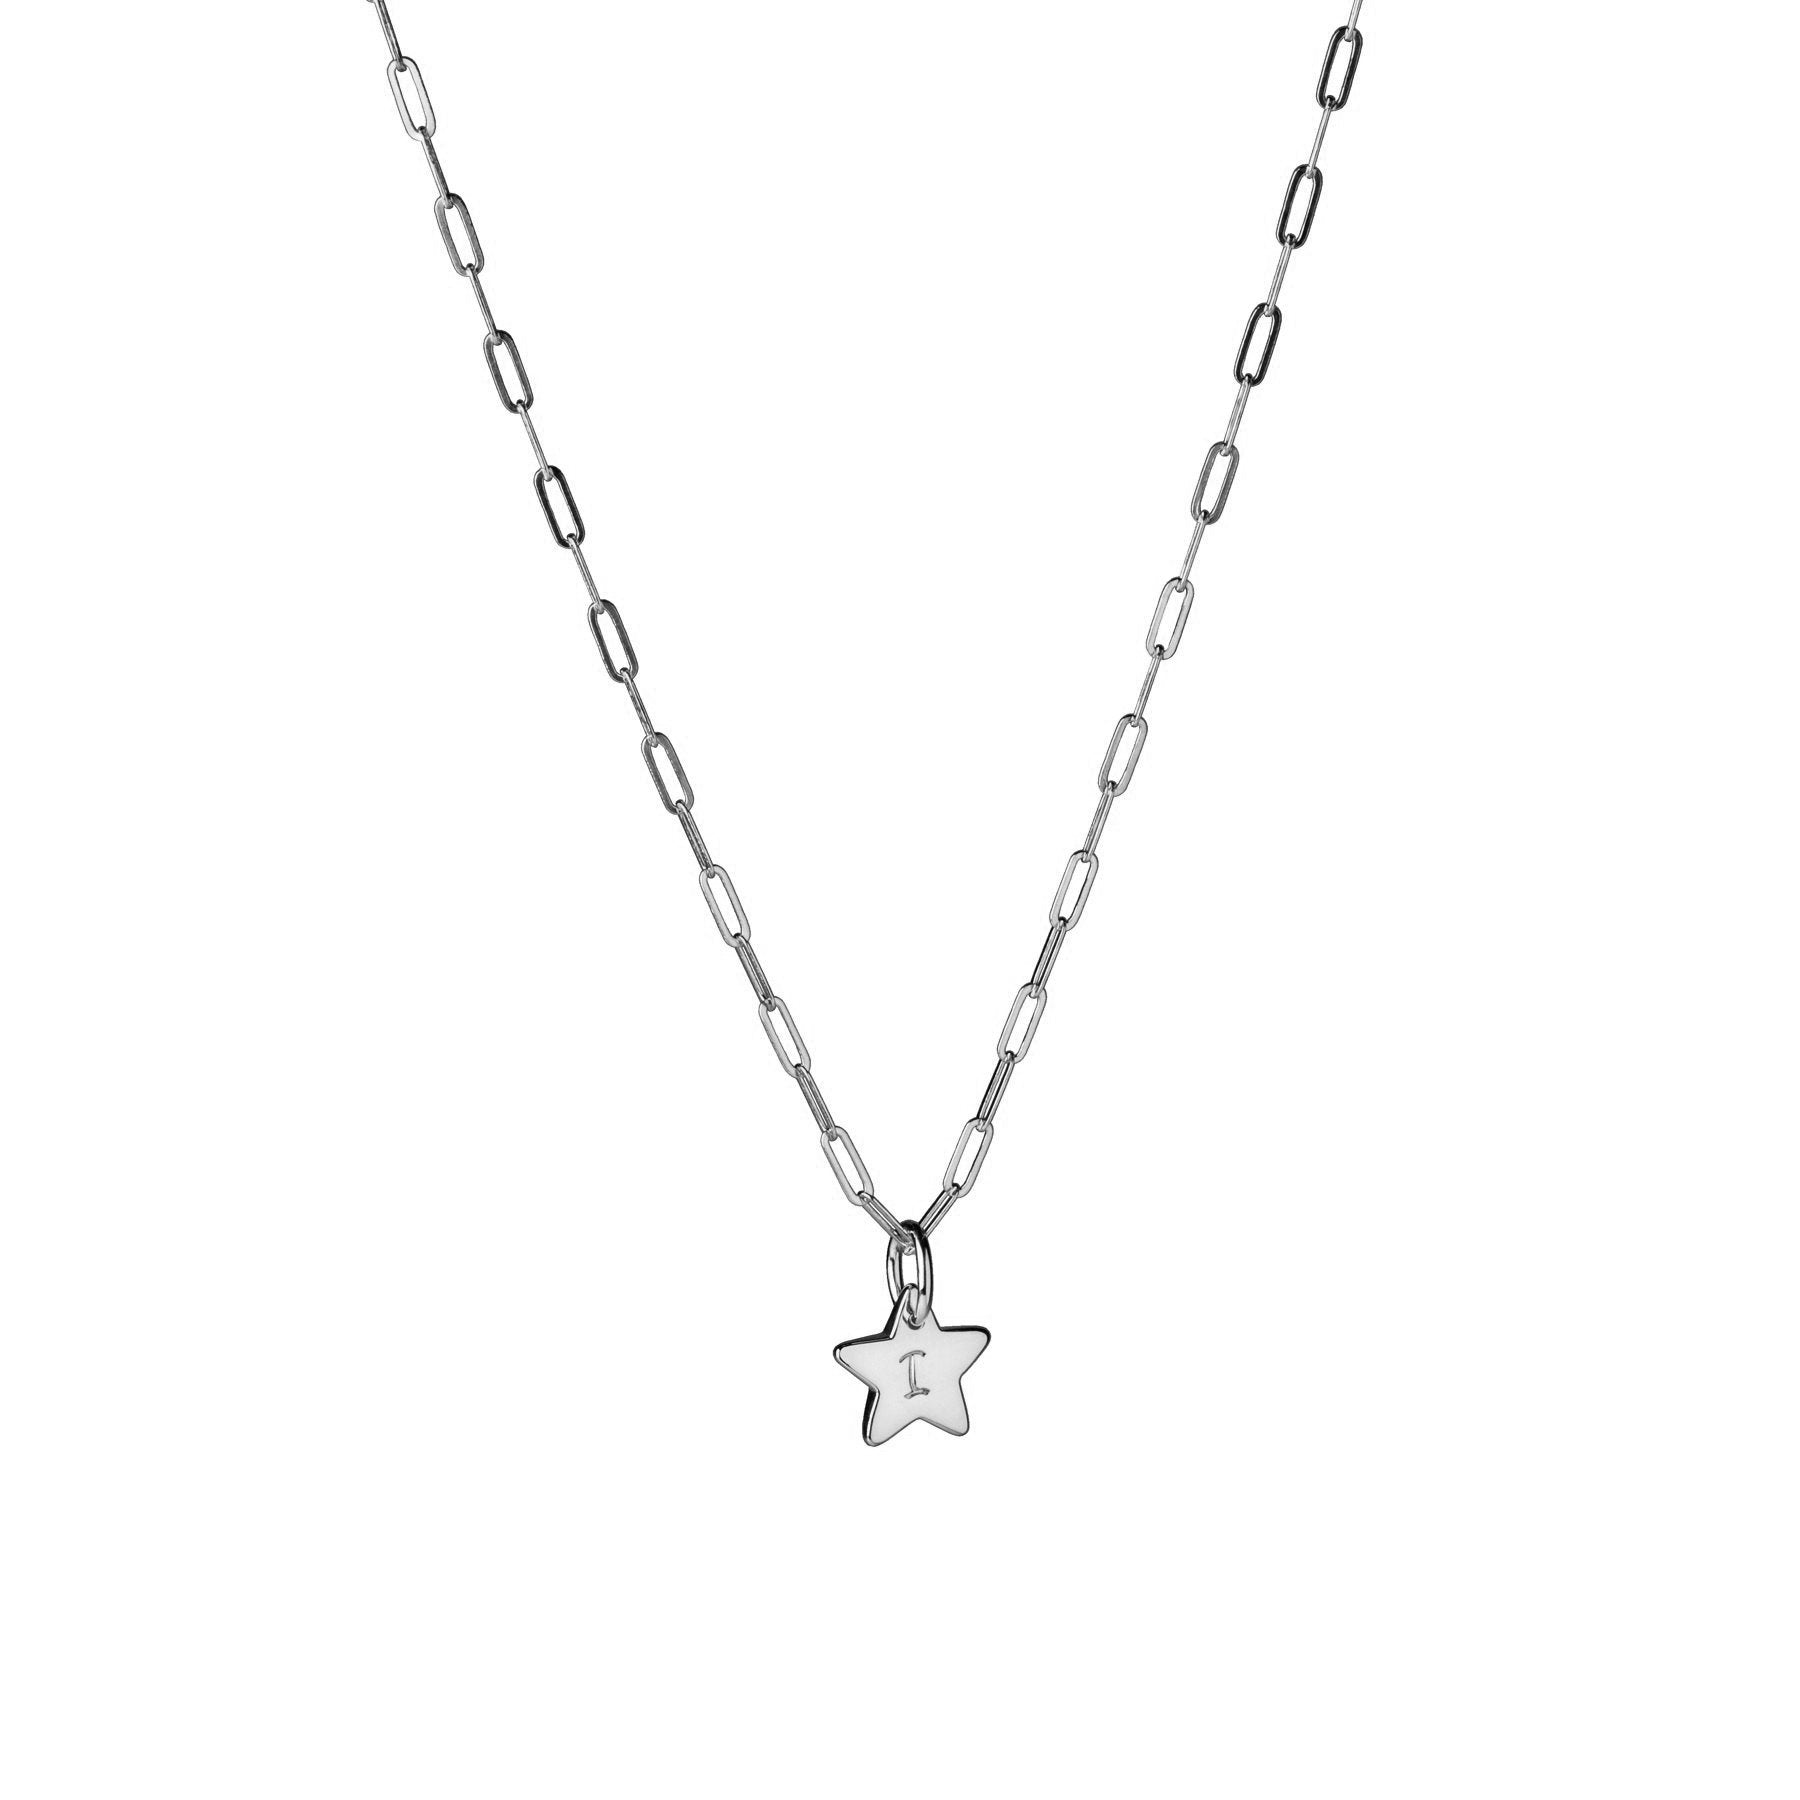 Maddie Star Charm - in support of mental health